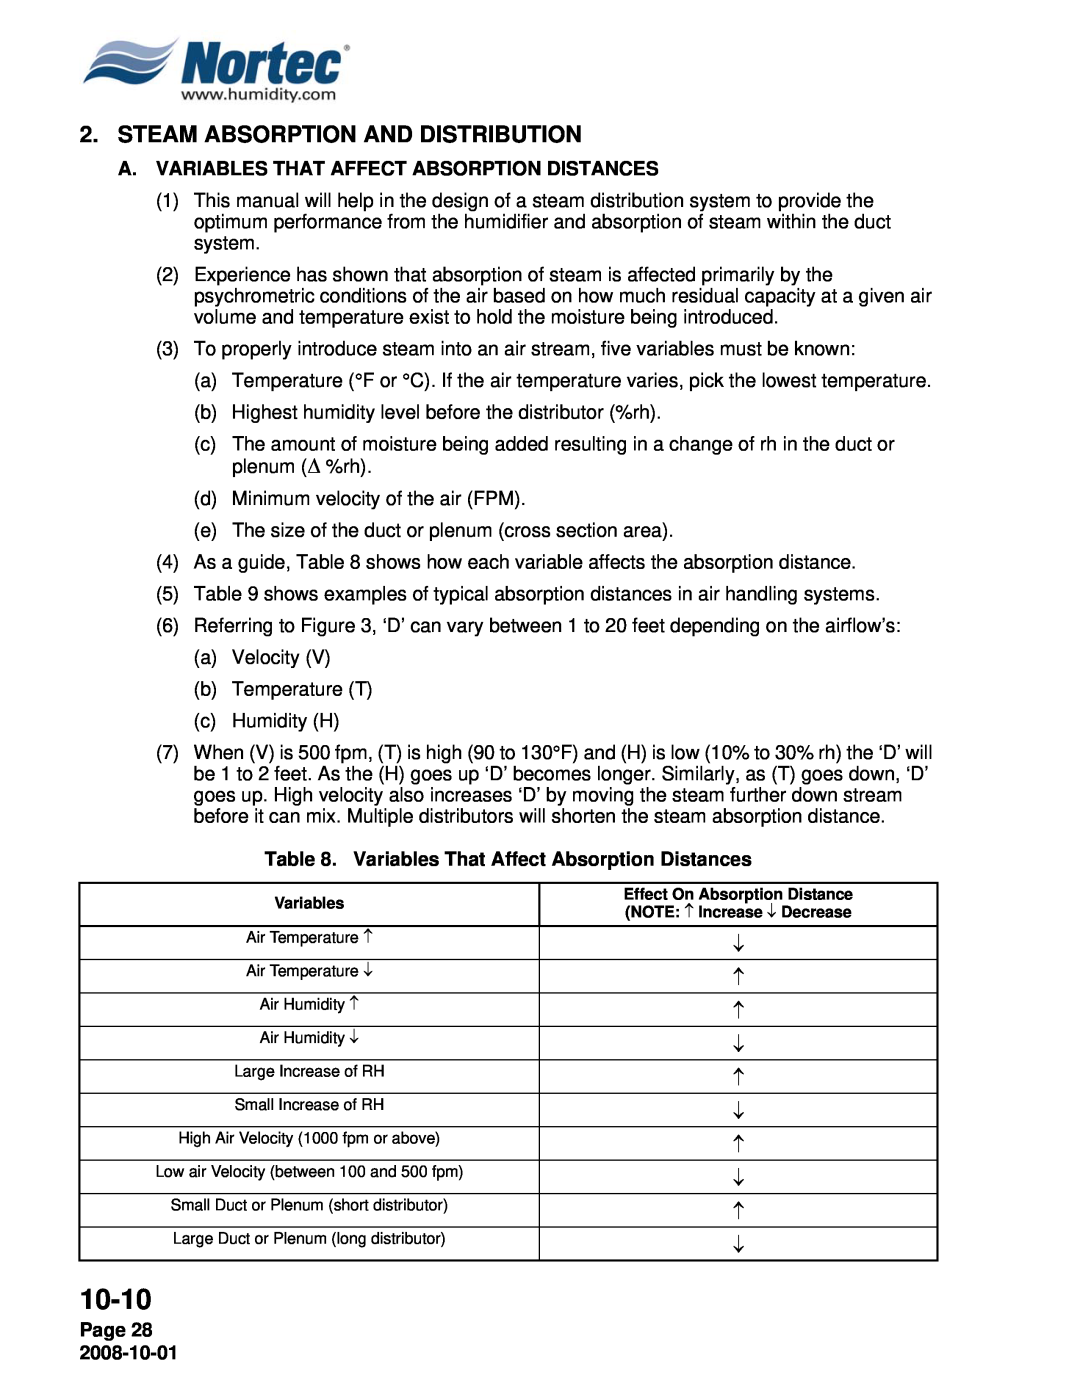 Nortec NHPC, NHTC manual Steam Absorption And Distribution, 10-10, A.Variables That Affect Absorption Distances, Page 28 